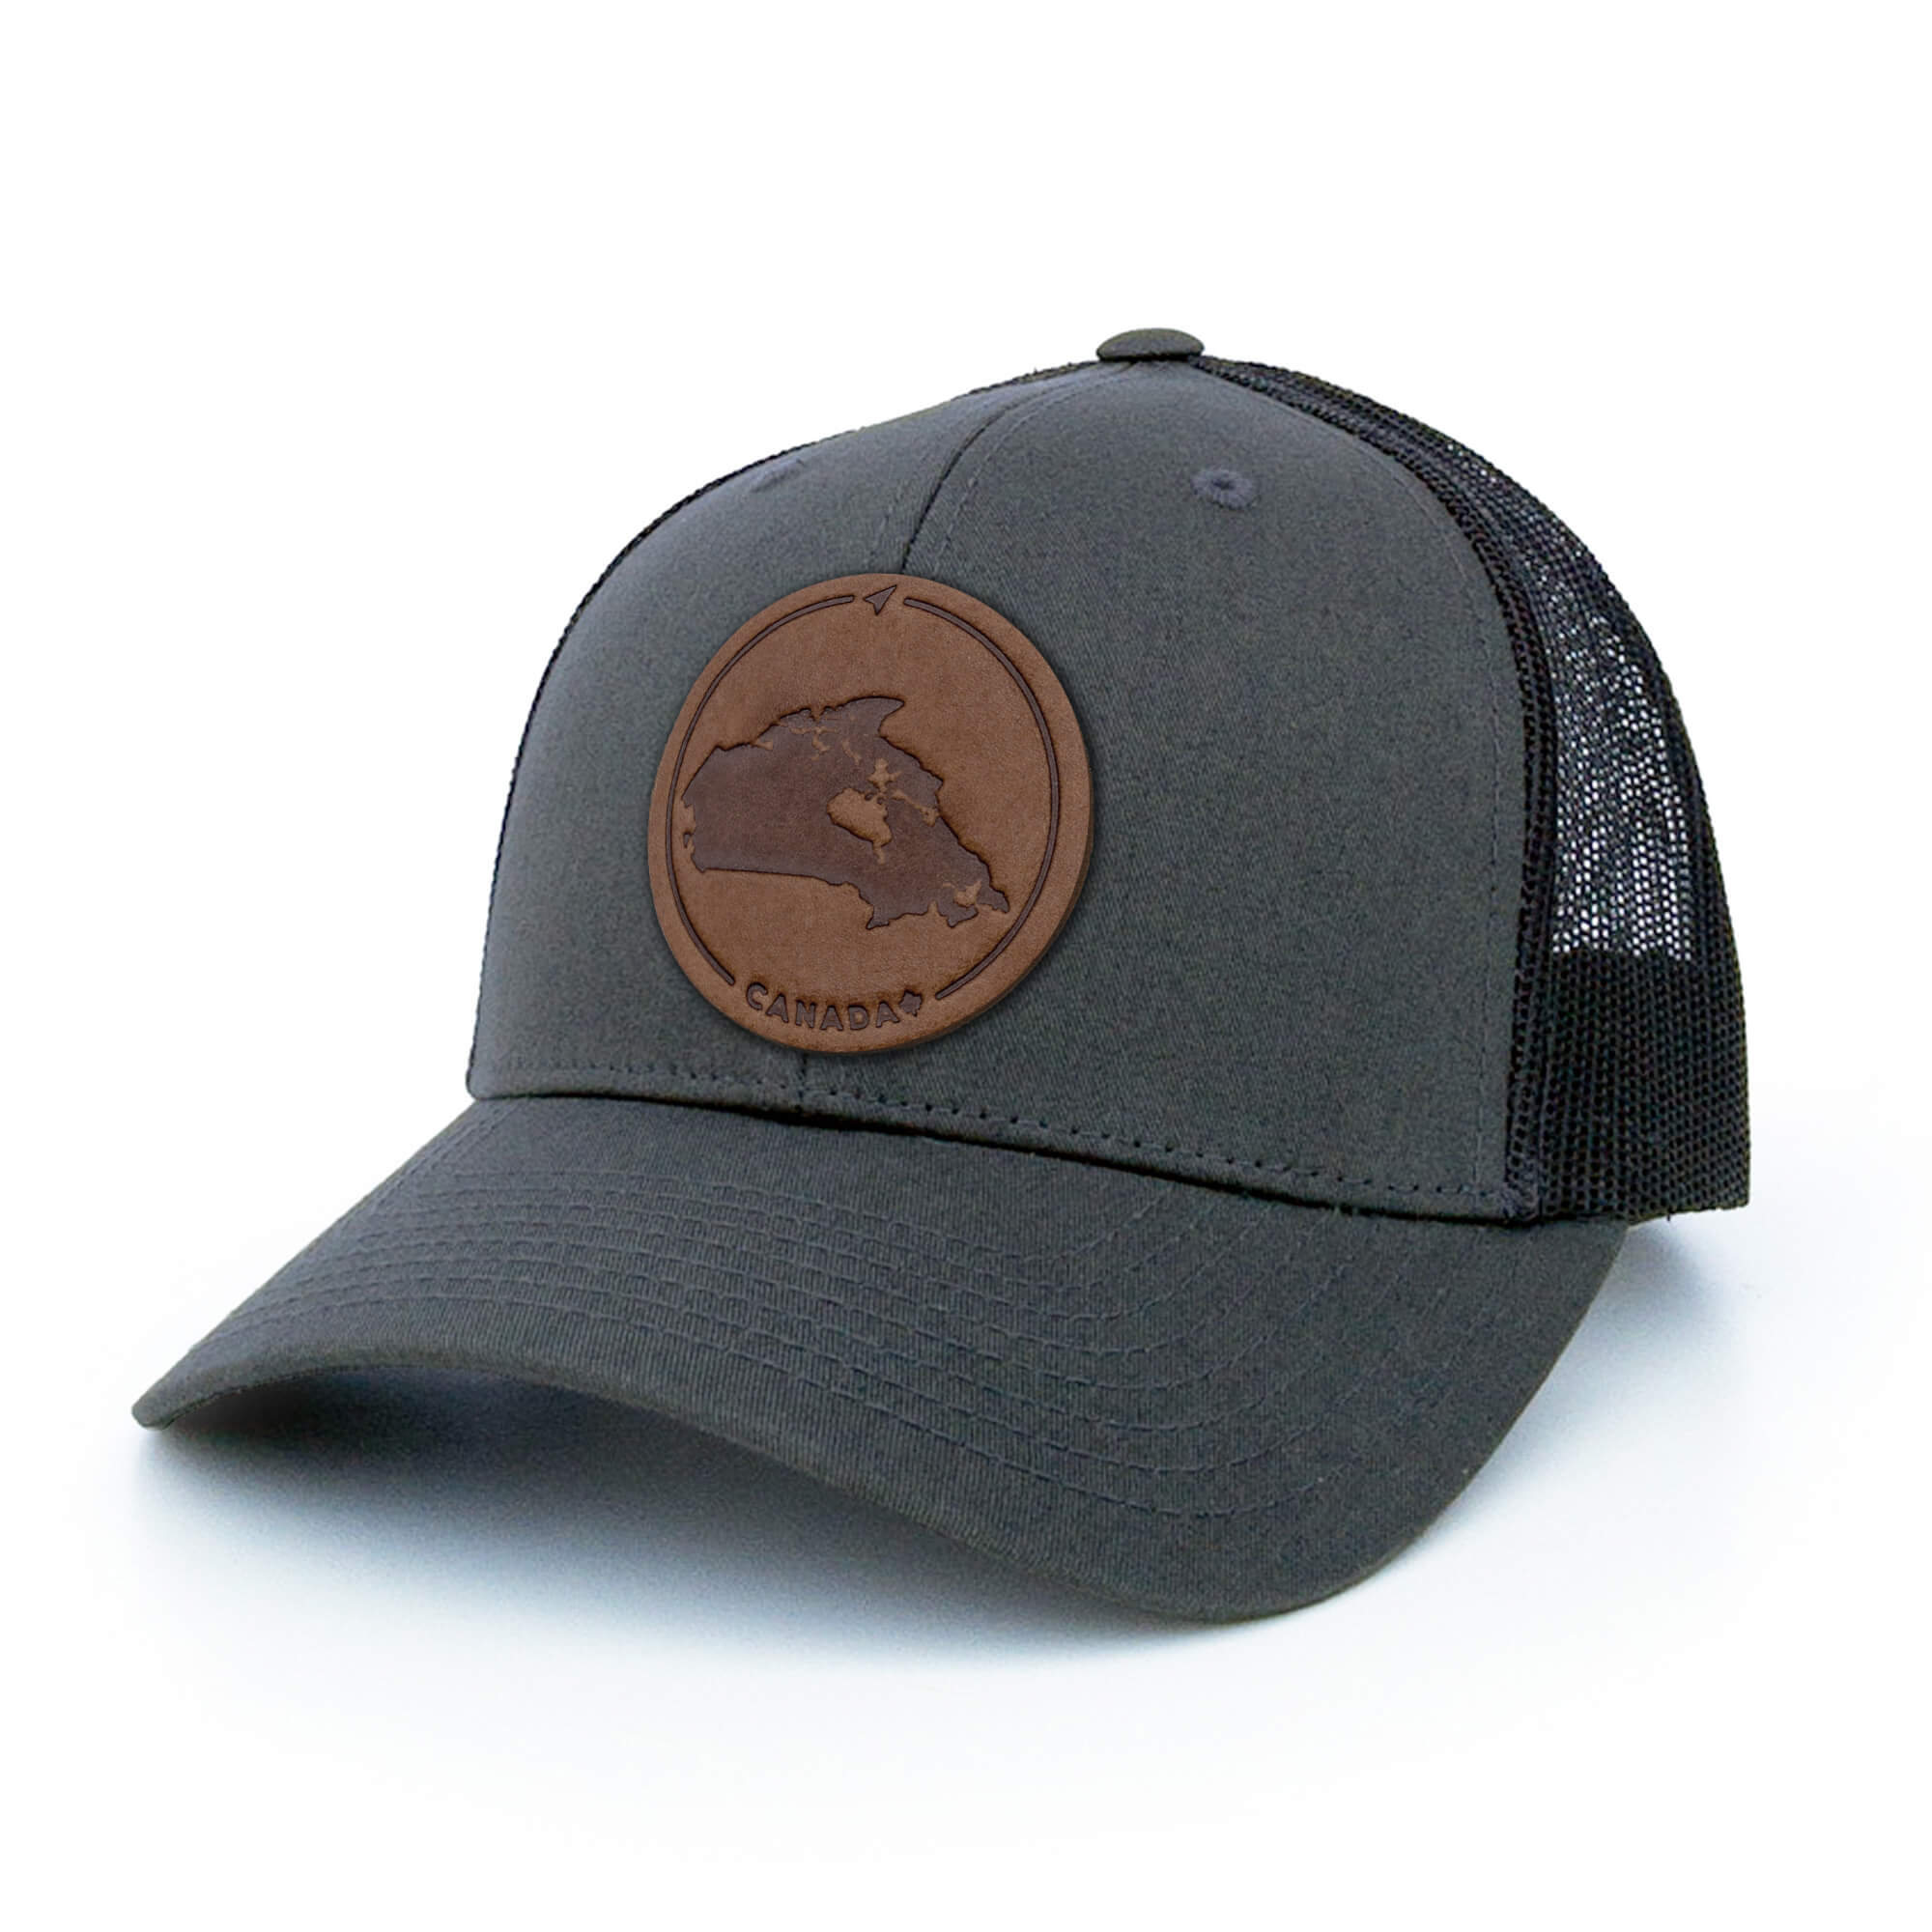 Charcoal trucker hat with full-grain leather patch of Canada | BLACK-002-002, CHARC-002-002, NAVY-002-002, HGREY-002-002, MOSS-002-002, BROWN-002-002, RED-002-002